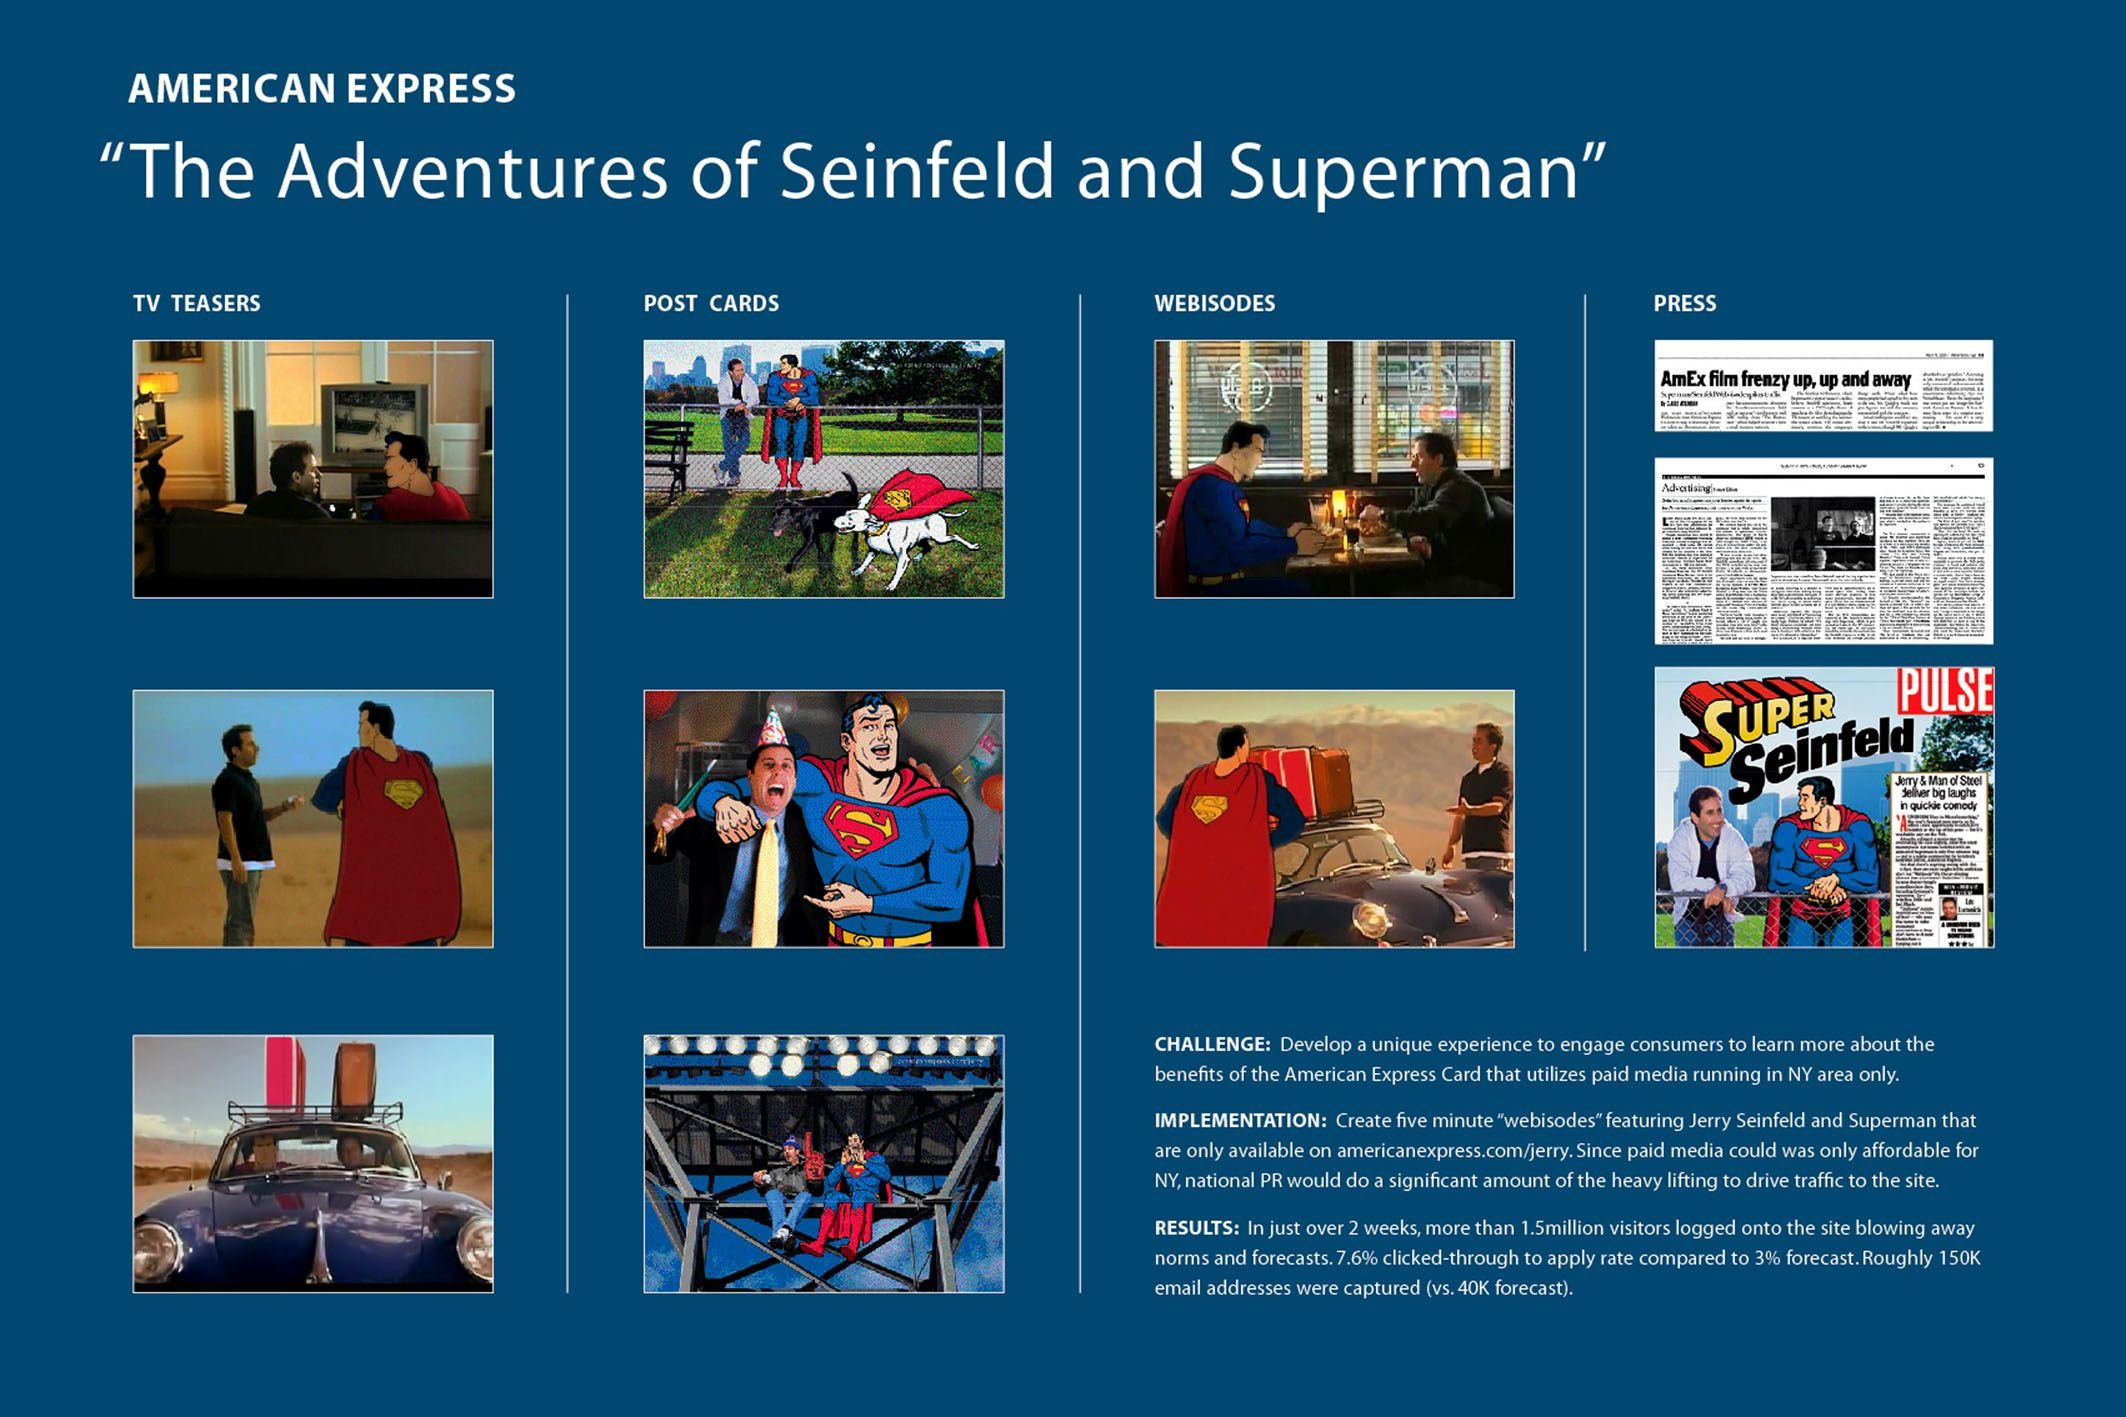 ADVENTURES OF SEINFELD AND SUPERMAN